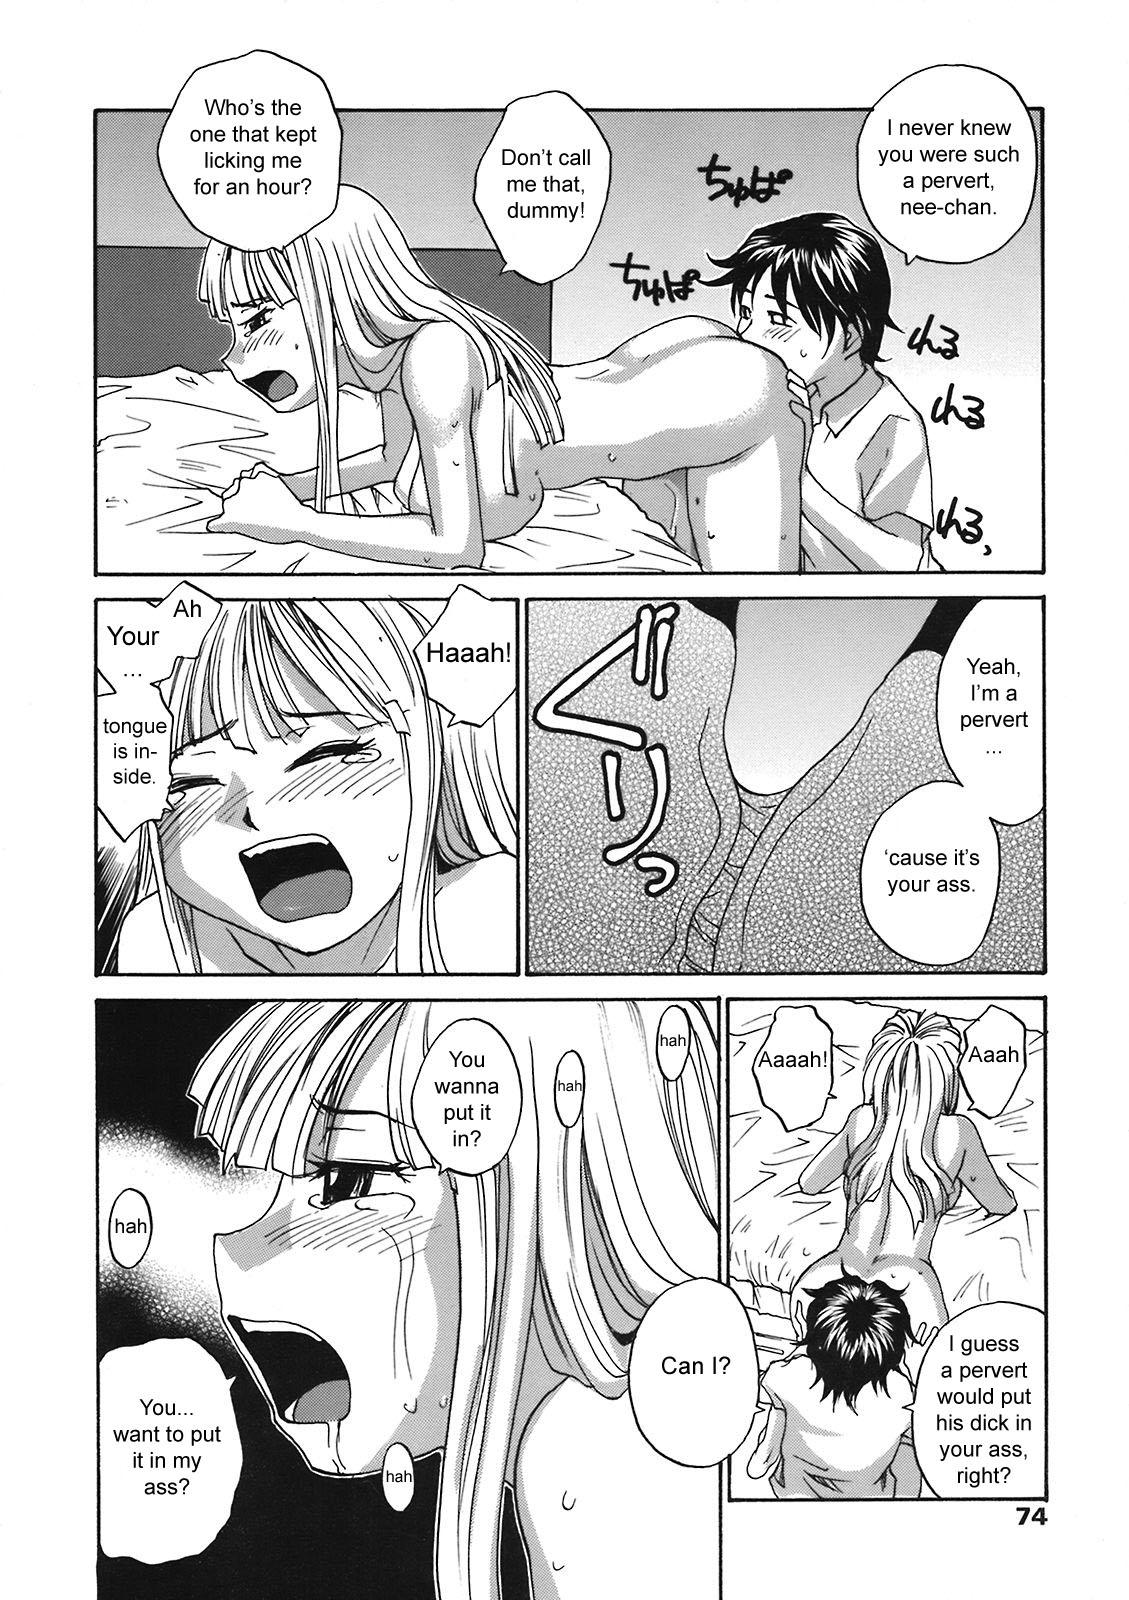 White Girl Back to Nee-chan Nipple - Page 8